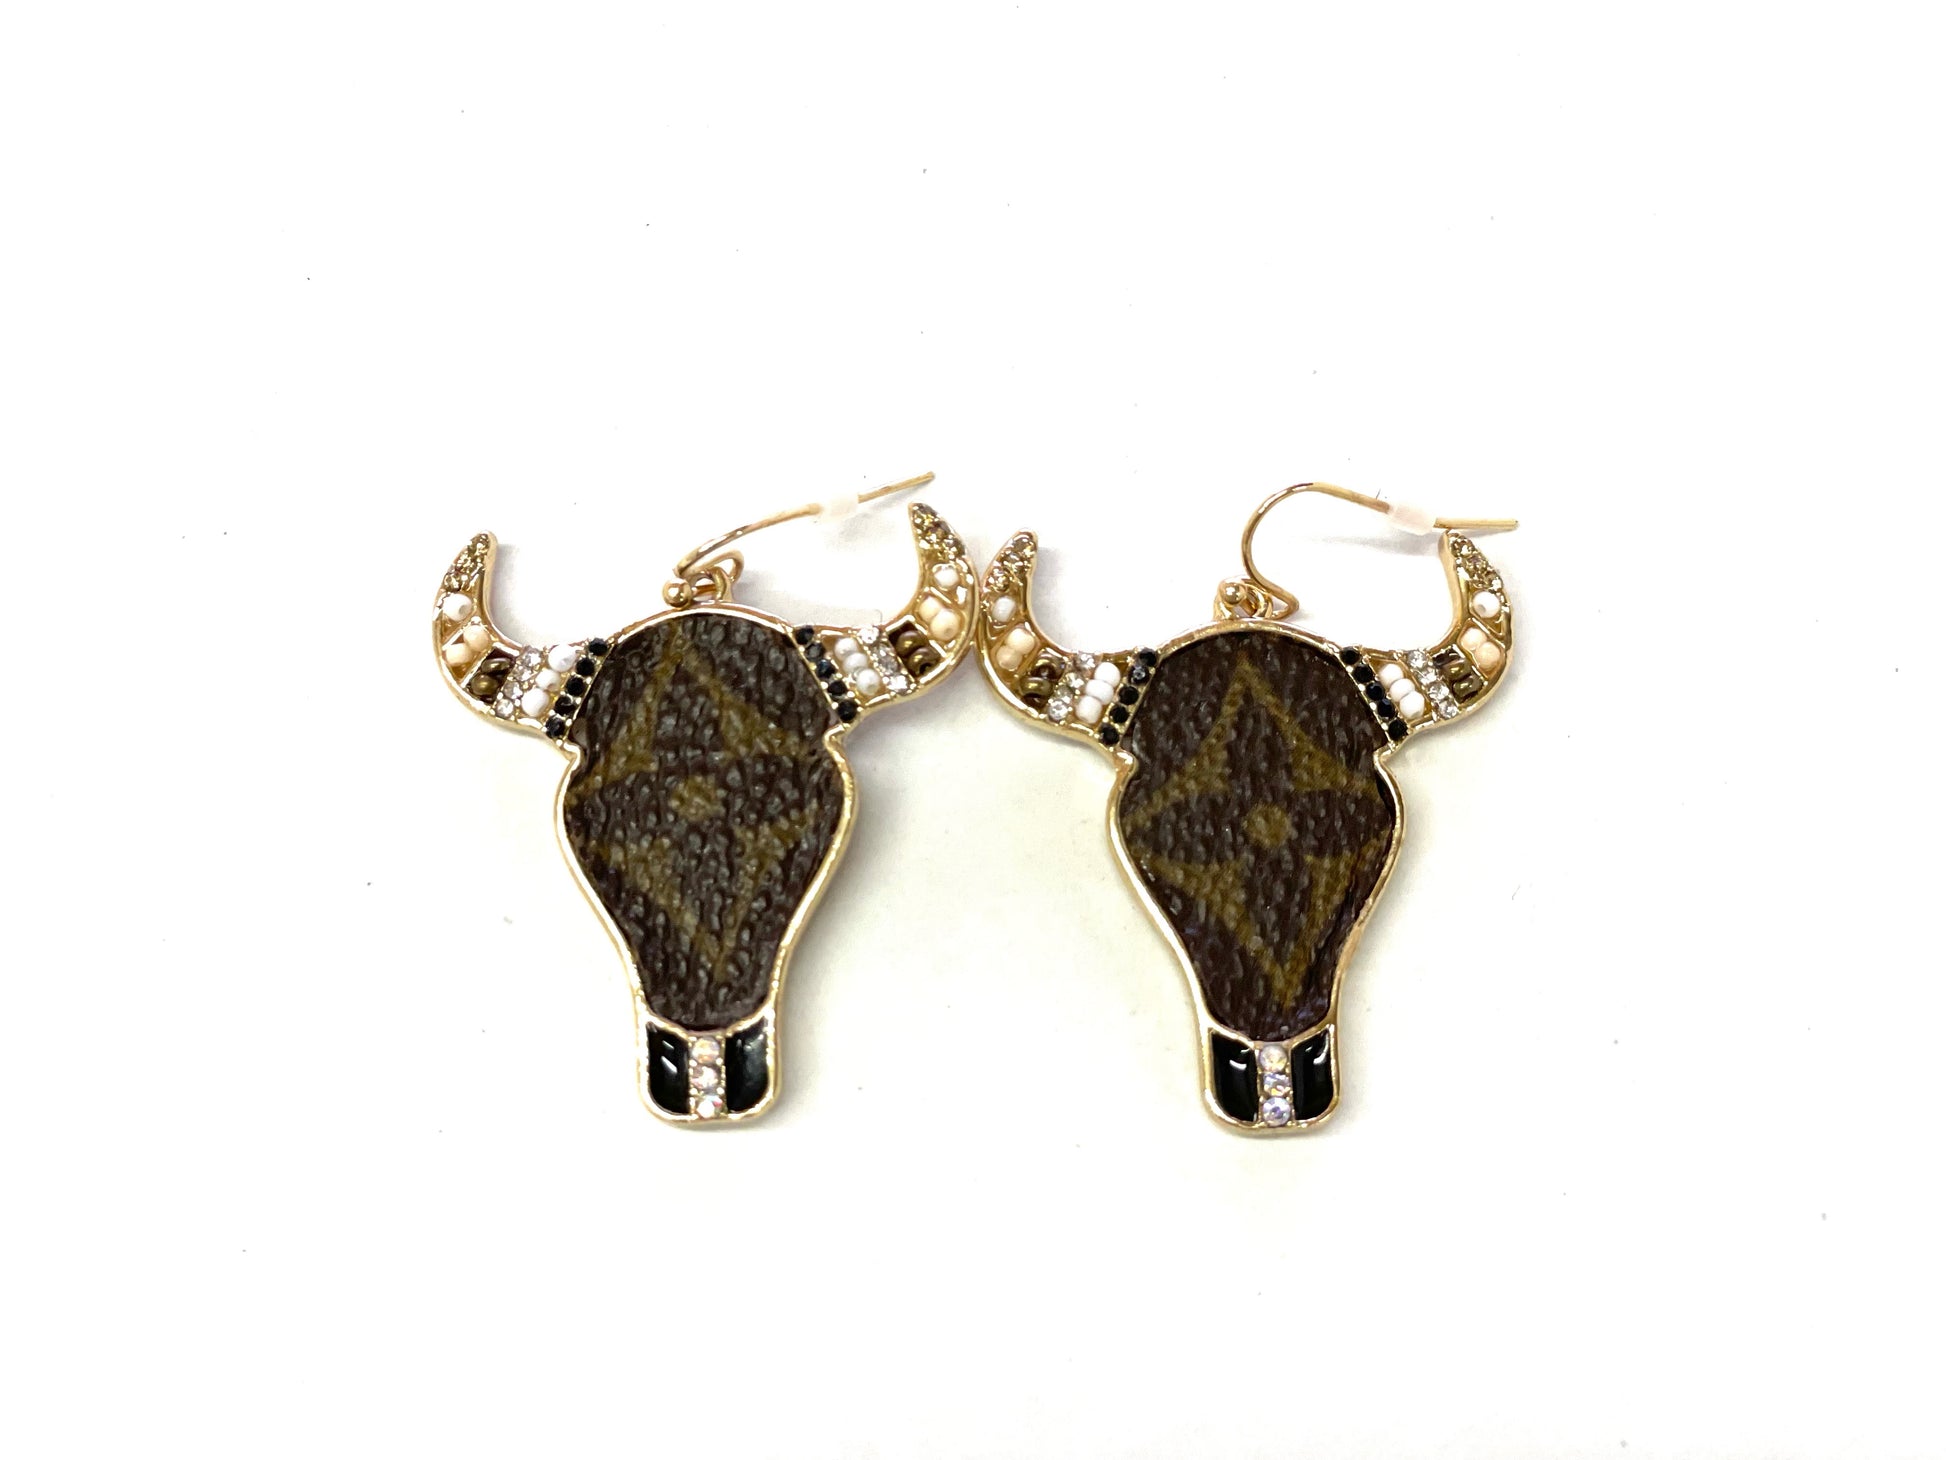 Longhorn earrings - Patches Of Upcycling